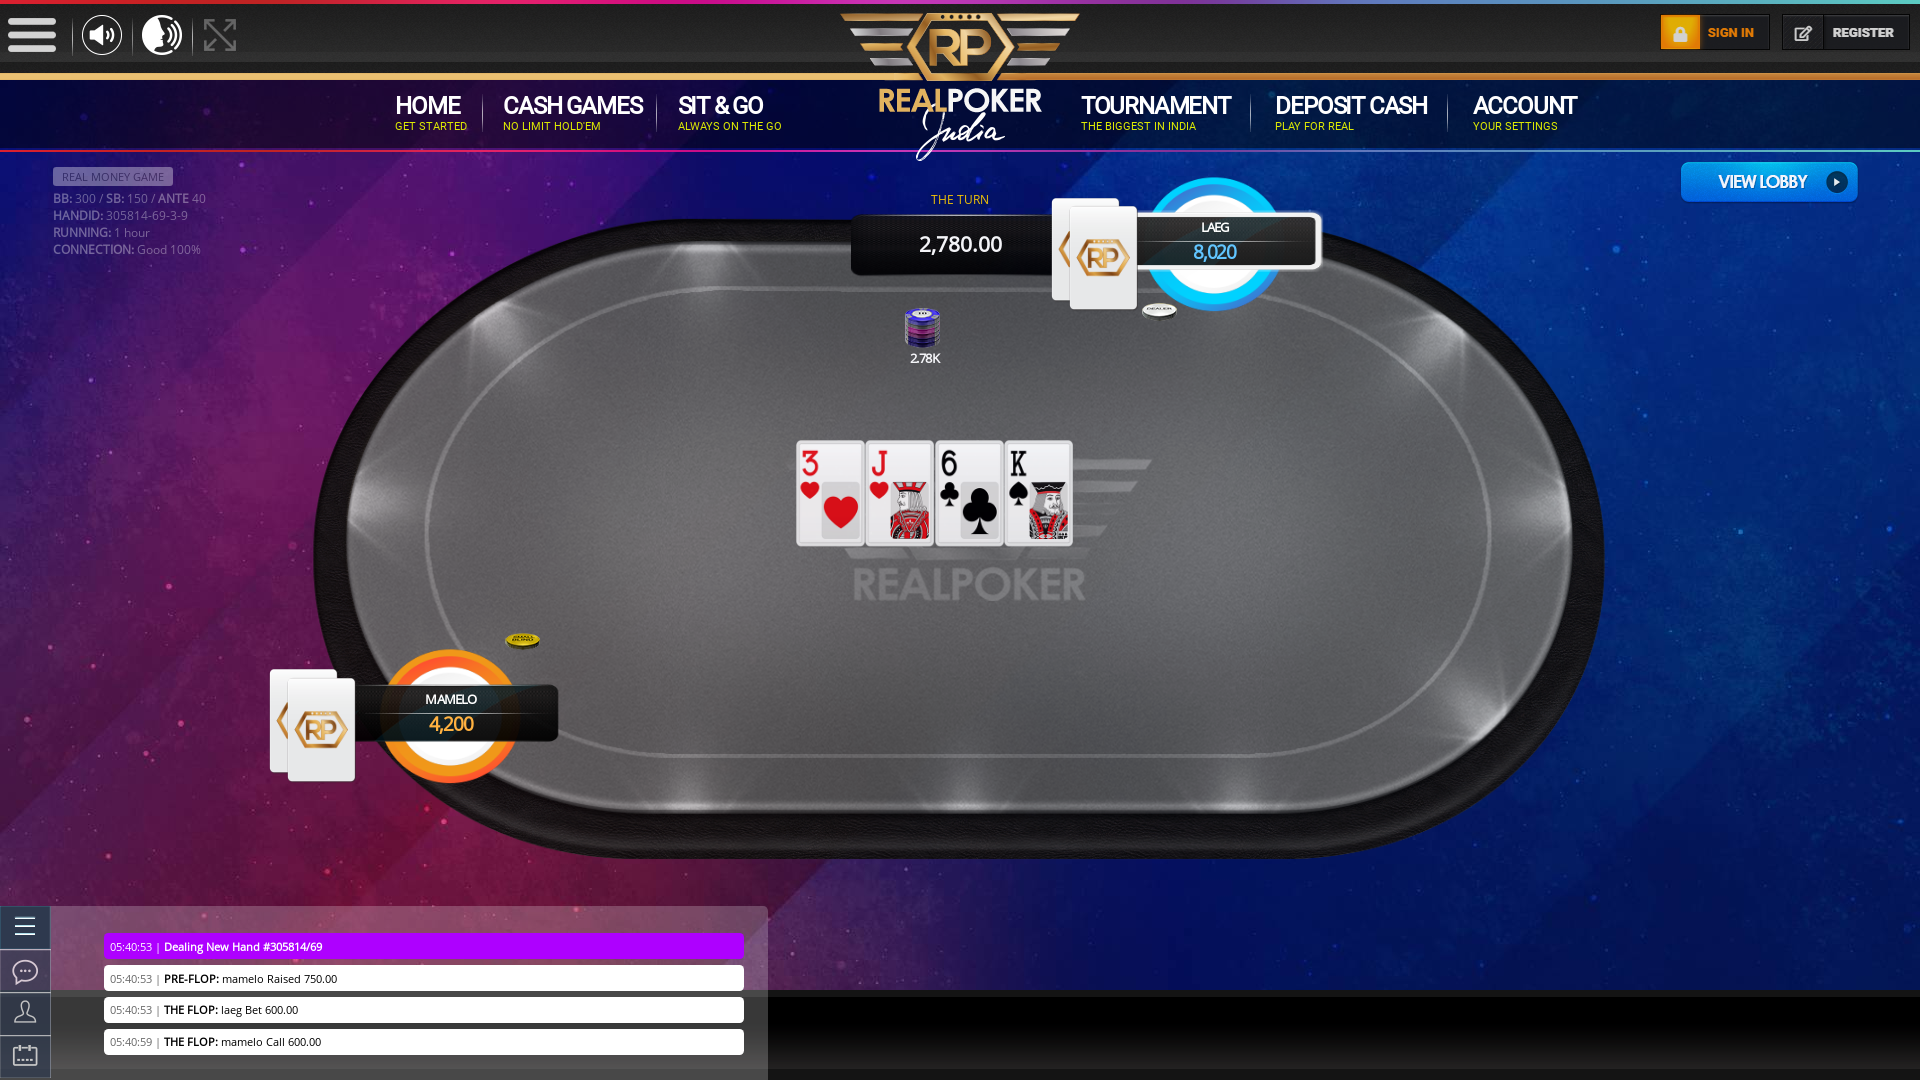 Real Indian poker on a 10 player table in the 59th minute of the game